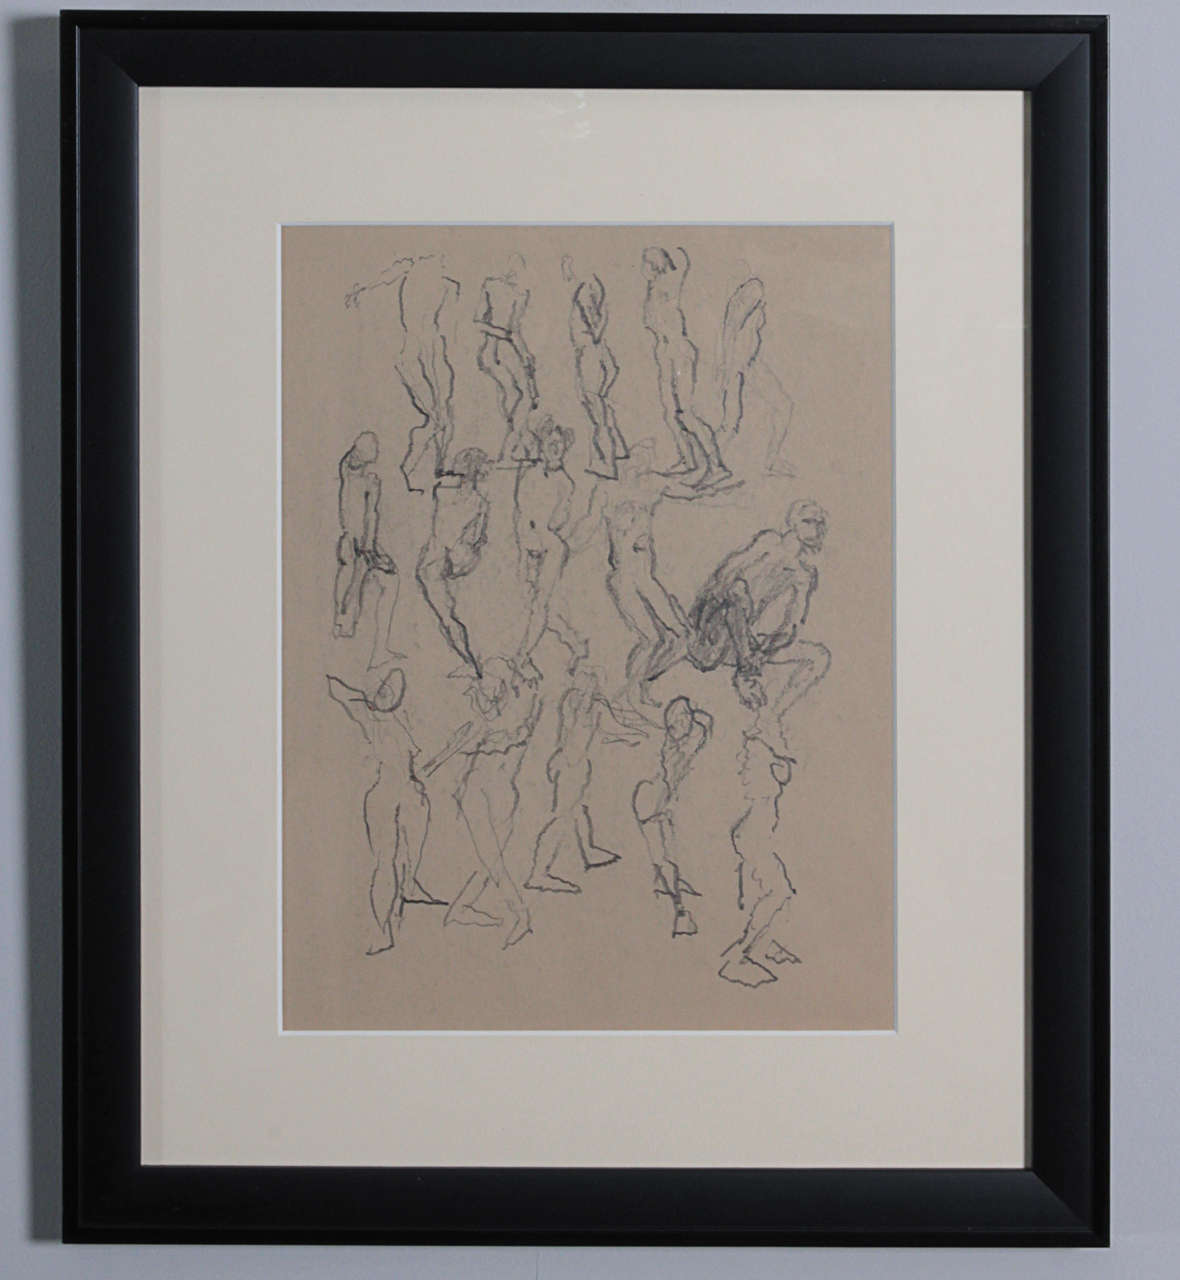 Mid century pencil sketch of various human forms